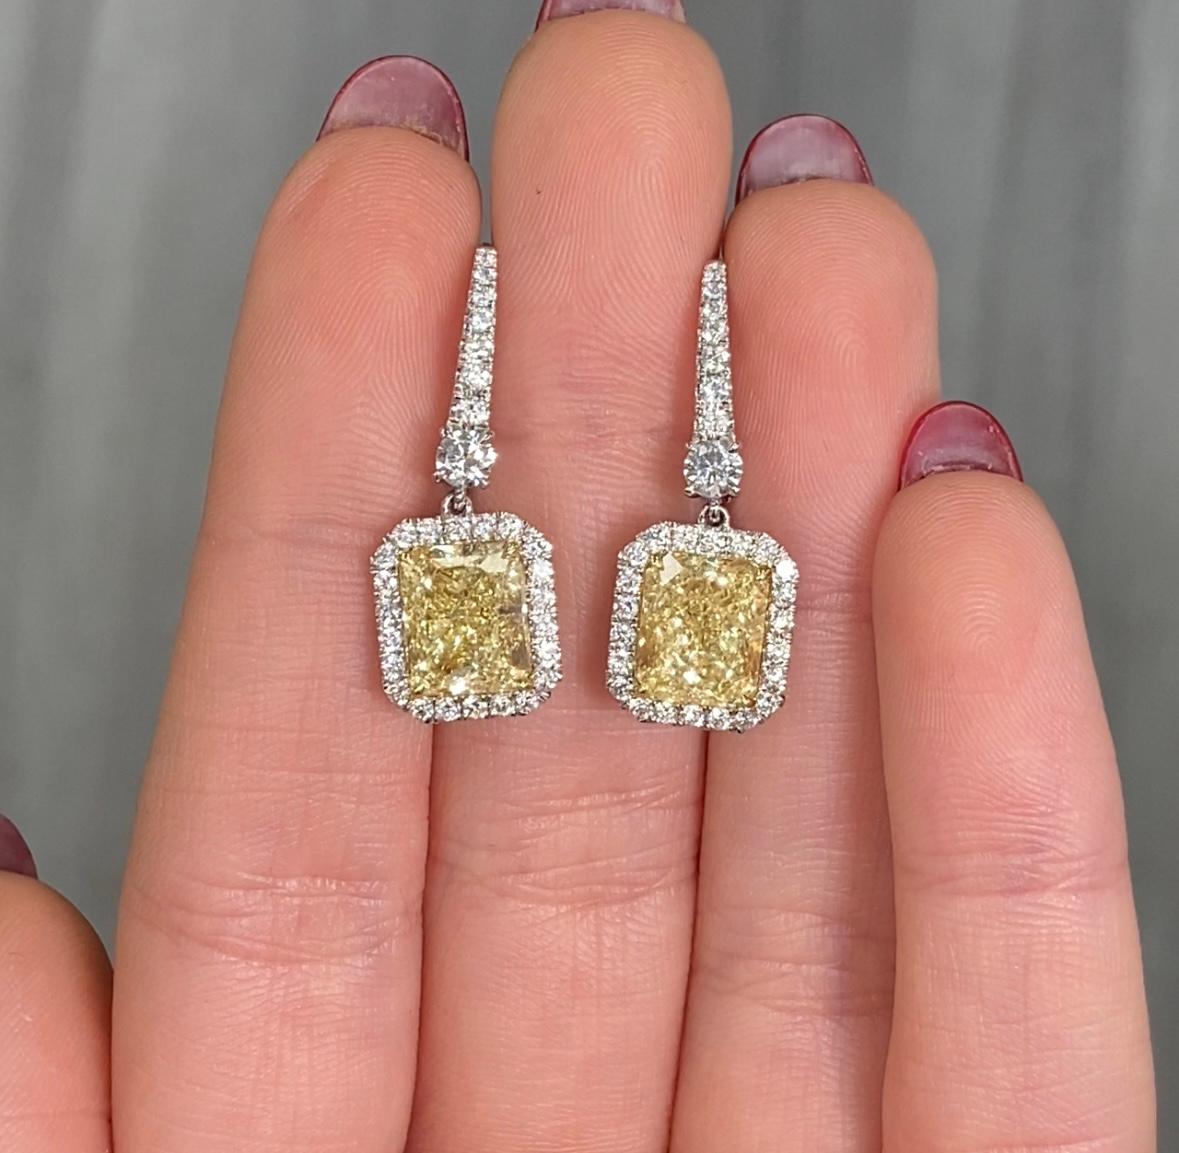 Sensational pair of earrings with an almost 5ct total weight pair of Fancy Light Yellow Radiants with VS clarity
Set in Platinum with 18kt Yellow Gold baskets and 0.40ct of white diamond pave

Making Extraordinary Attainable with Rare Colors
